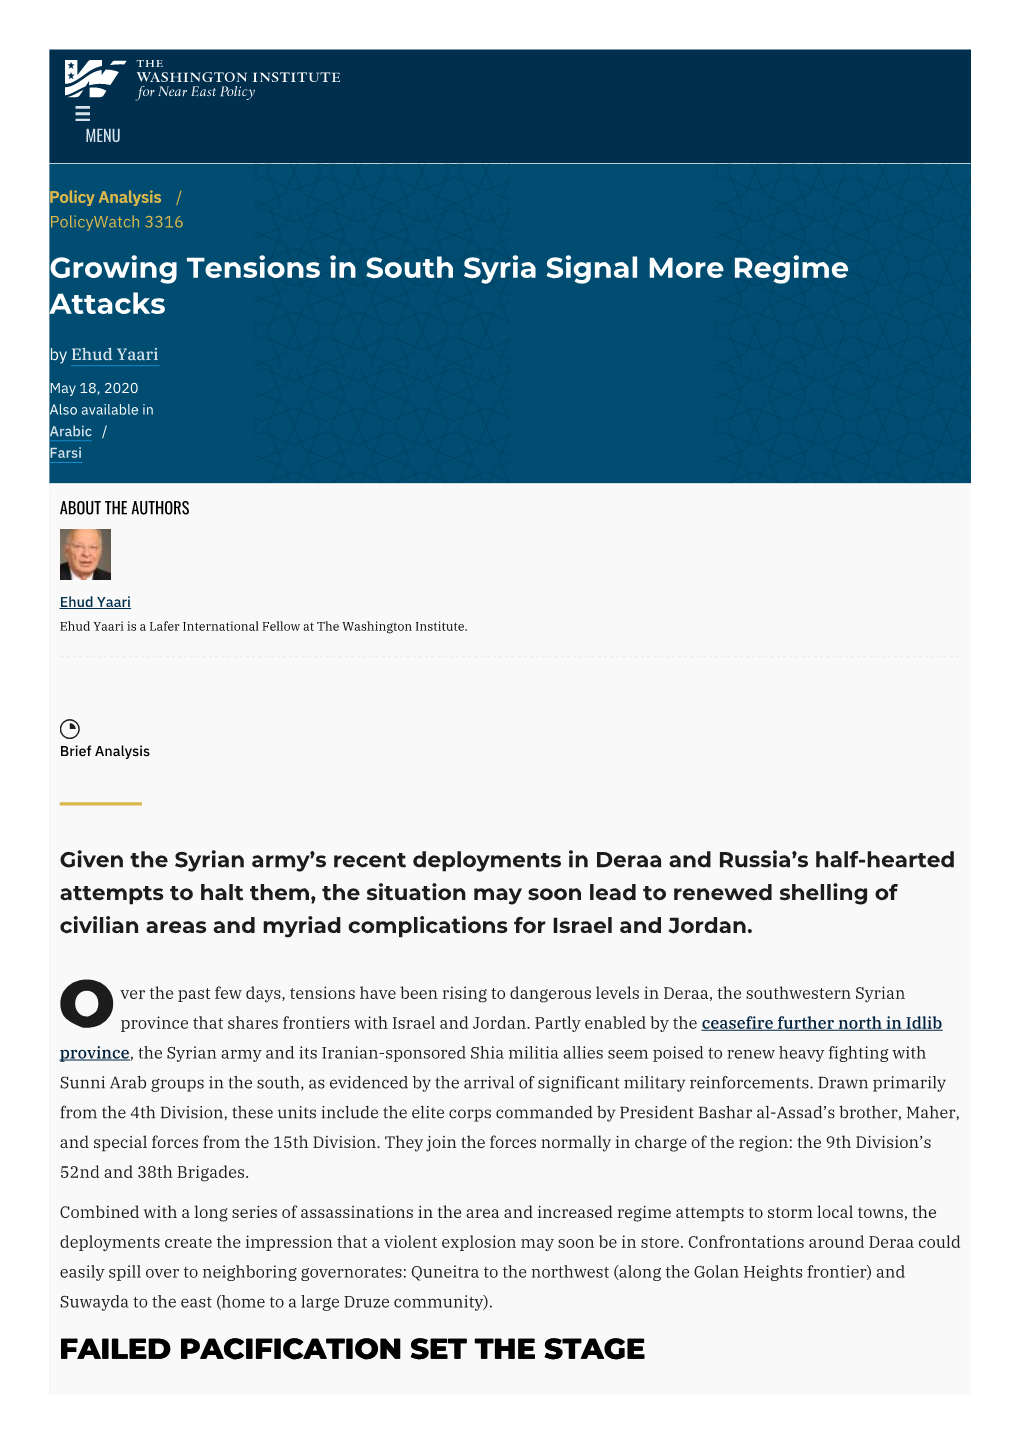 Growing Tensions in South Syria Signal More Regime Attacks | the Washington Institute